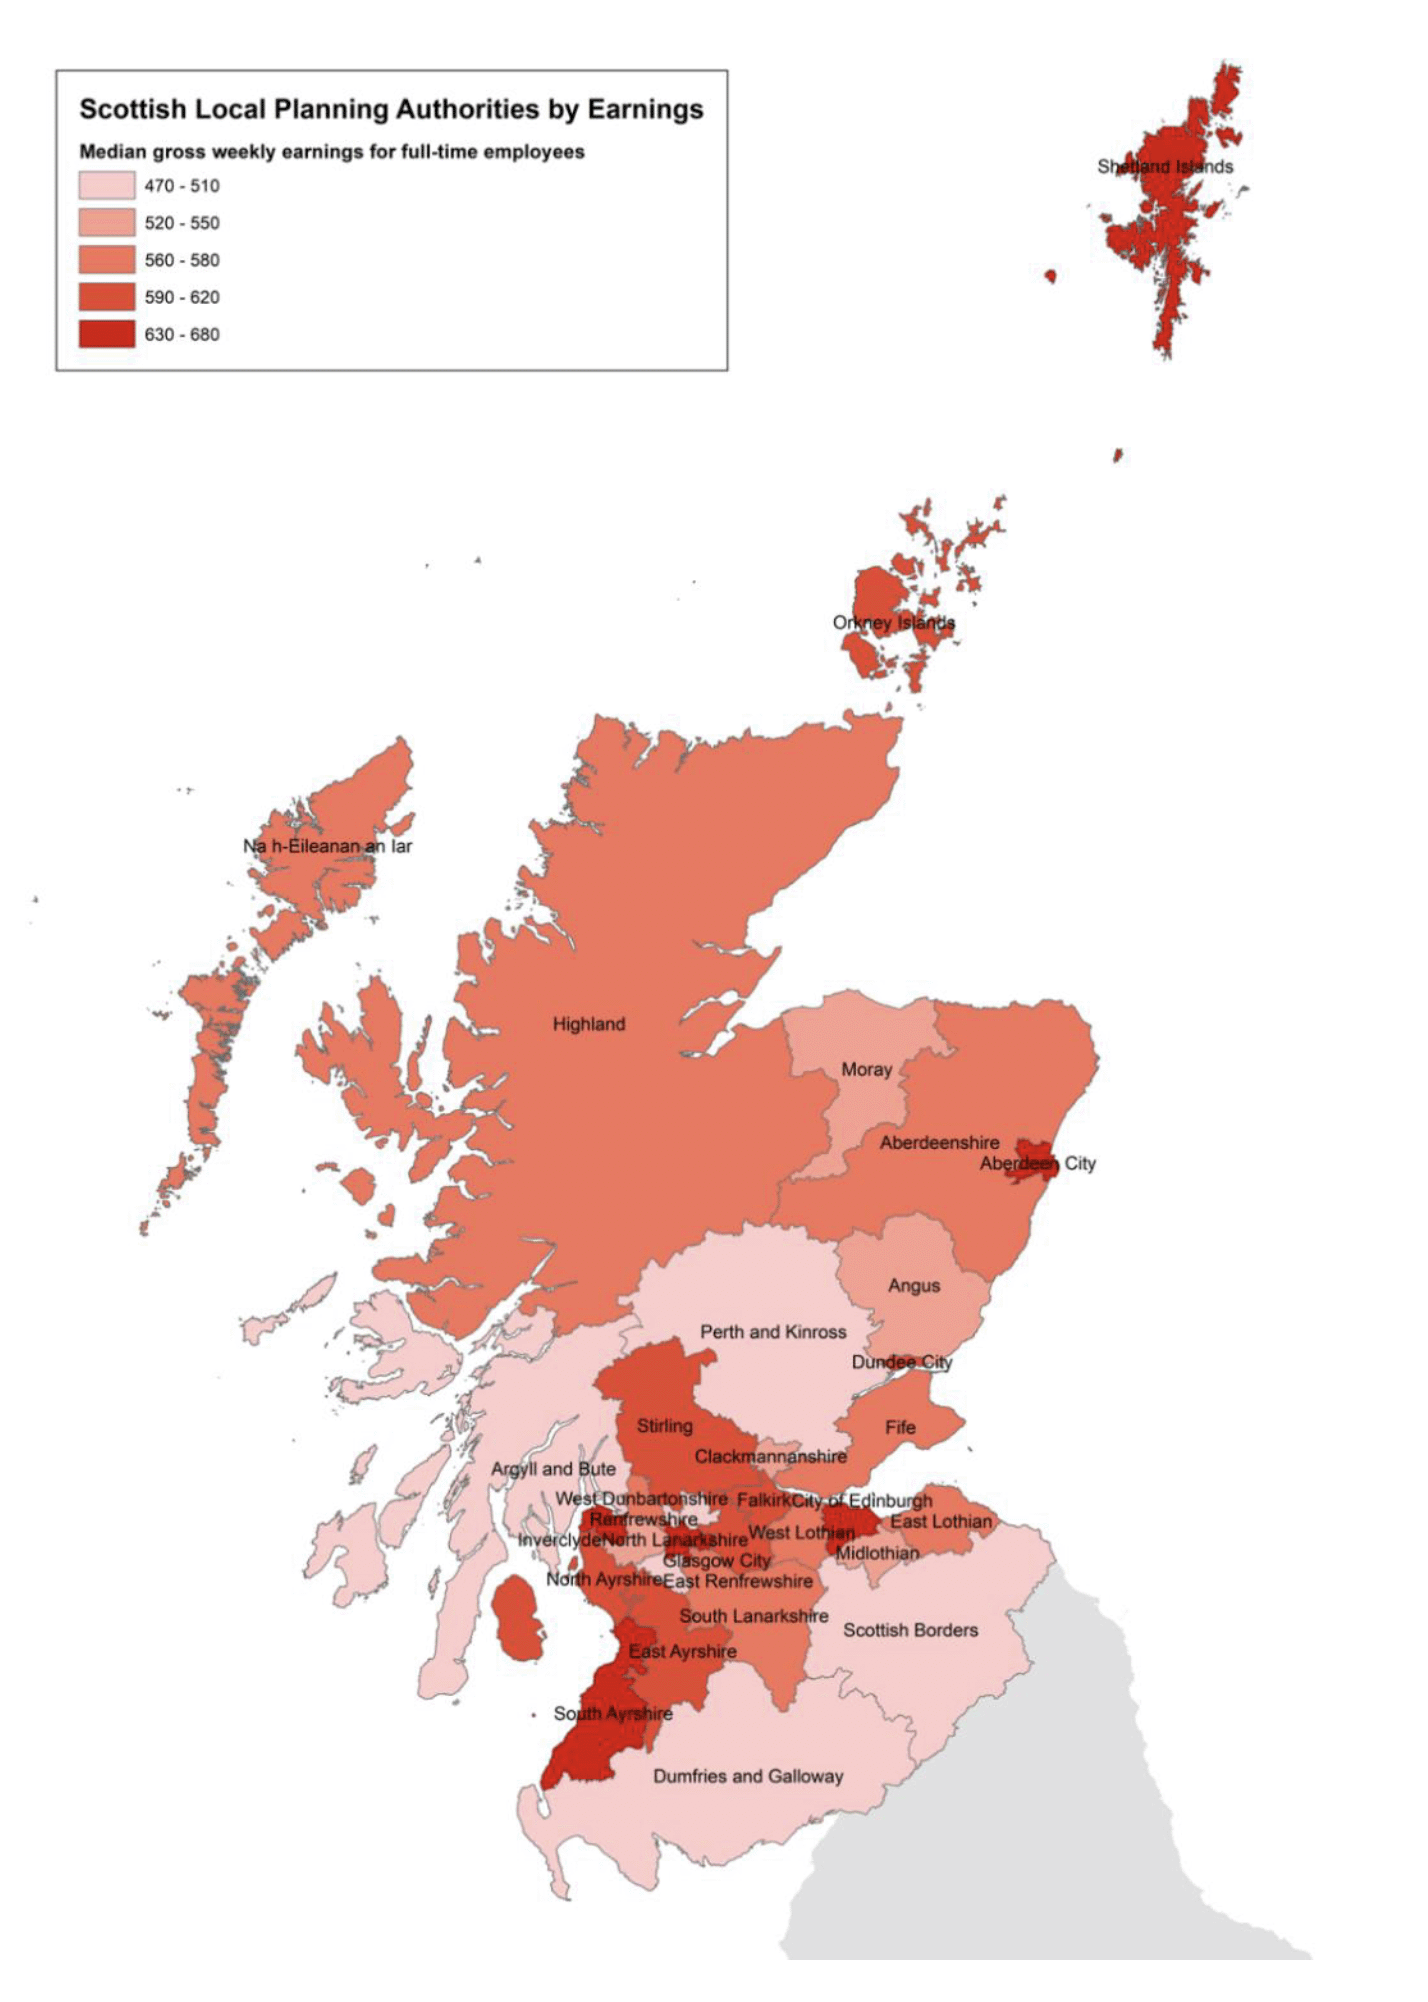 Map illustrating median weekly earnings in Scotland, indicating that earnings are generally higher in the central belt.